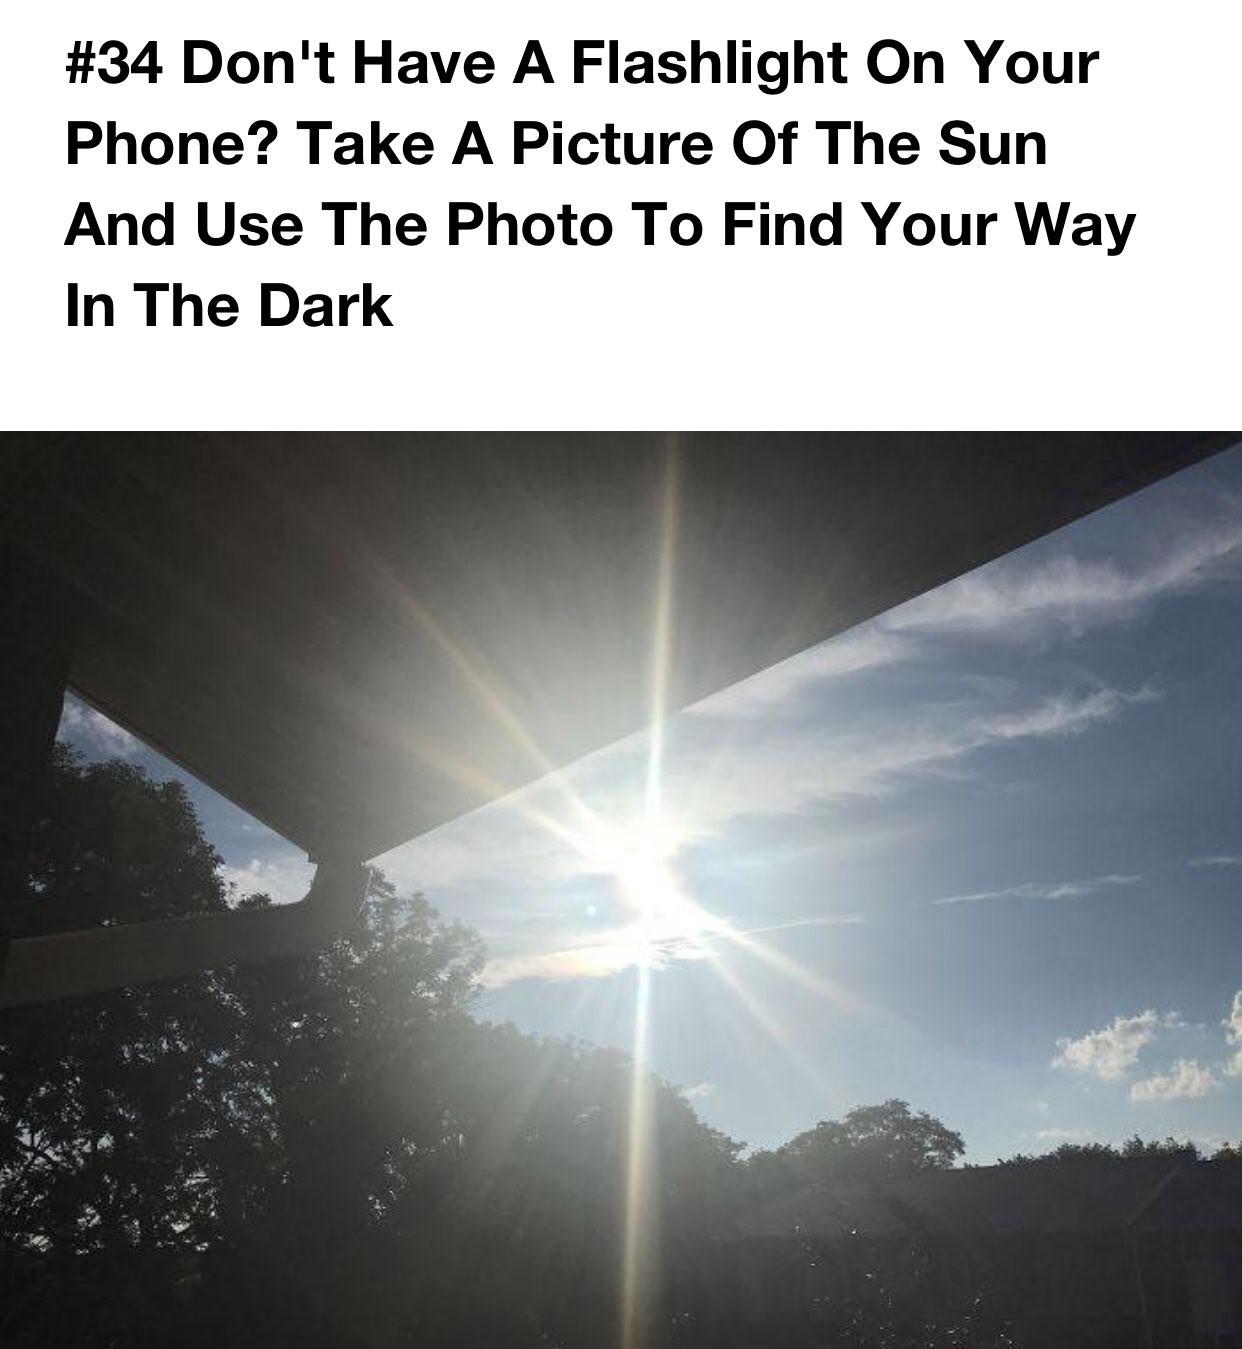 sky - Don't Have A Flashlight On Your Phone? Take A Picture Of The Sun And Use The Photo To Find Your Way In The Dark